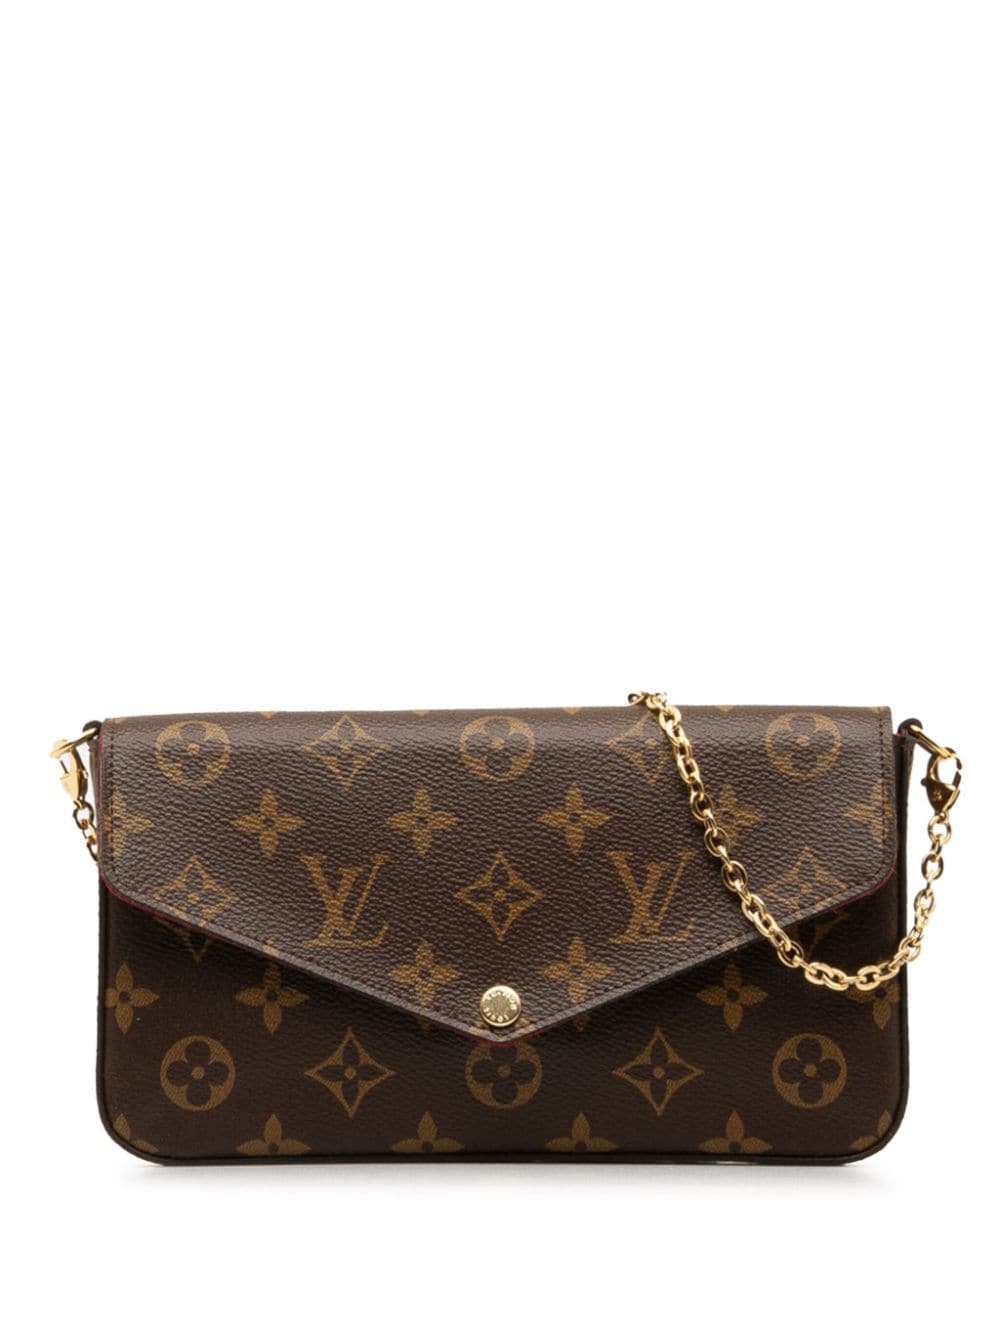 Pre-owned Louis Vuitton 2018 Felicie Clutch Bag In Brown